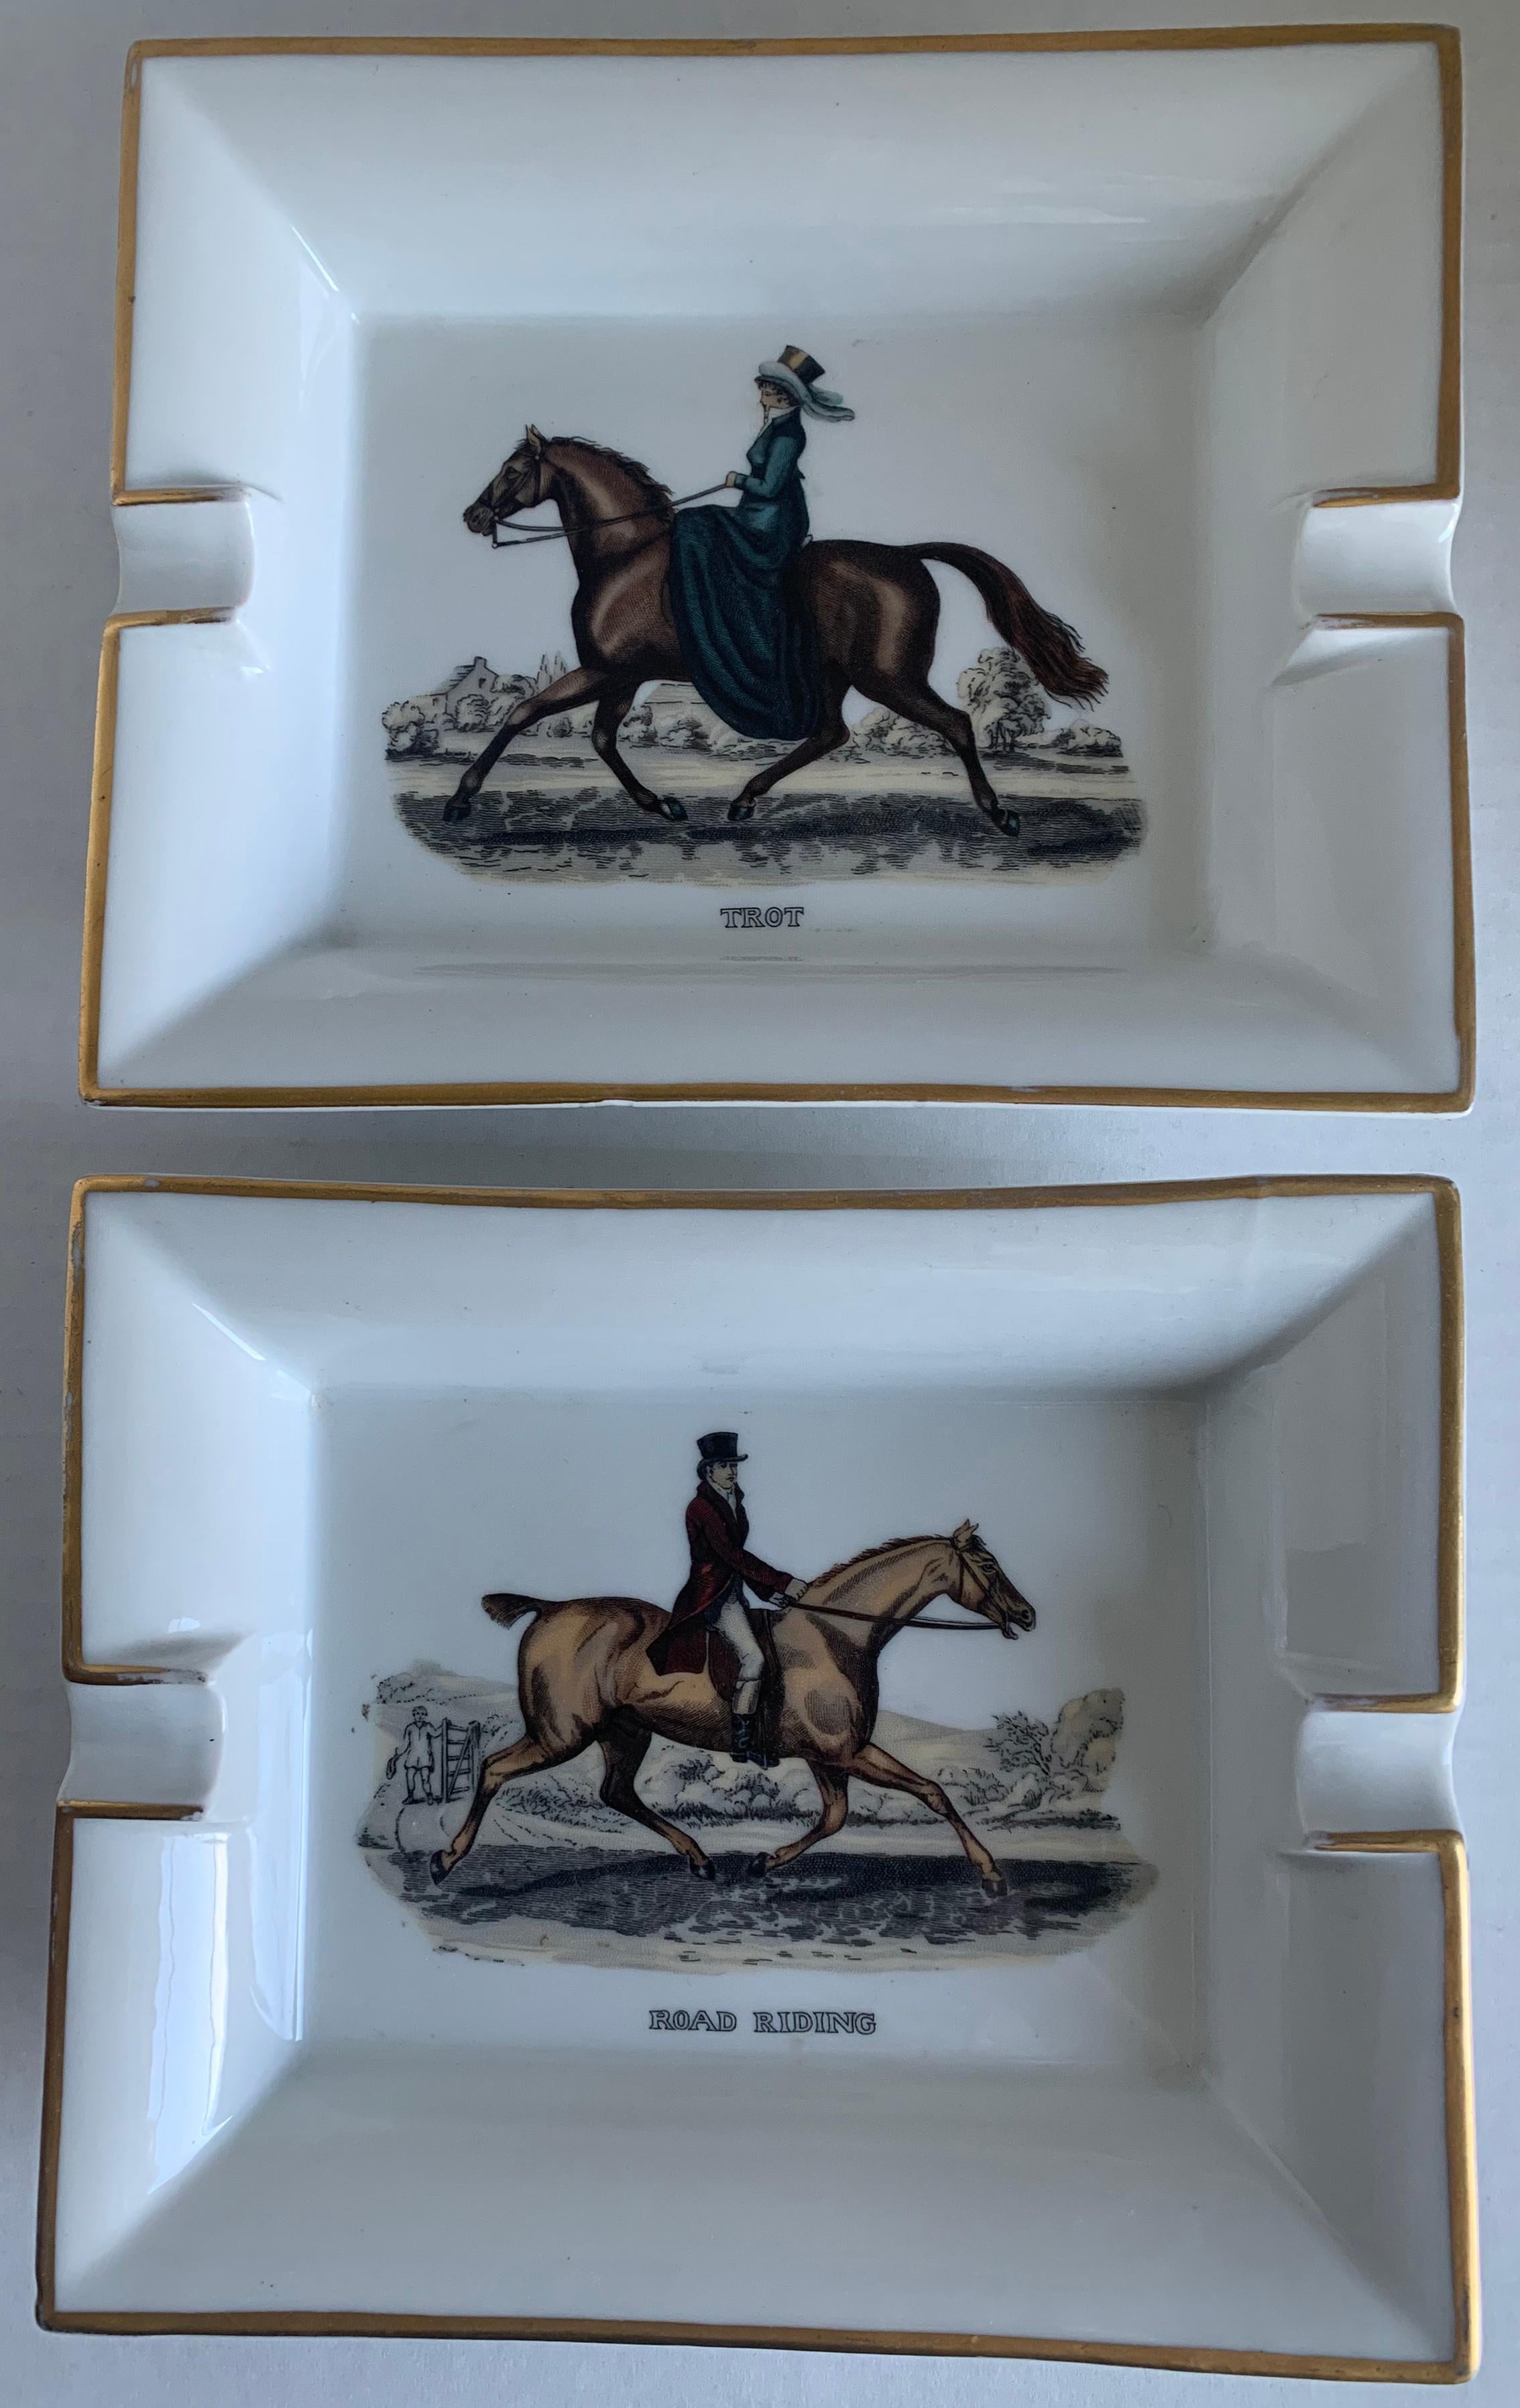 Pair of 1970s Hermès Paris porcelain equestrian ashtrays. Each ashtray features an equestrian motif with painted gold banding. Signed Hermès on the side of each ashtray.